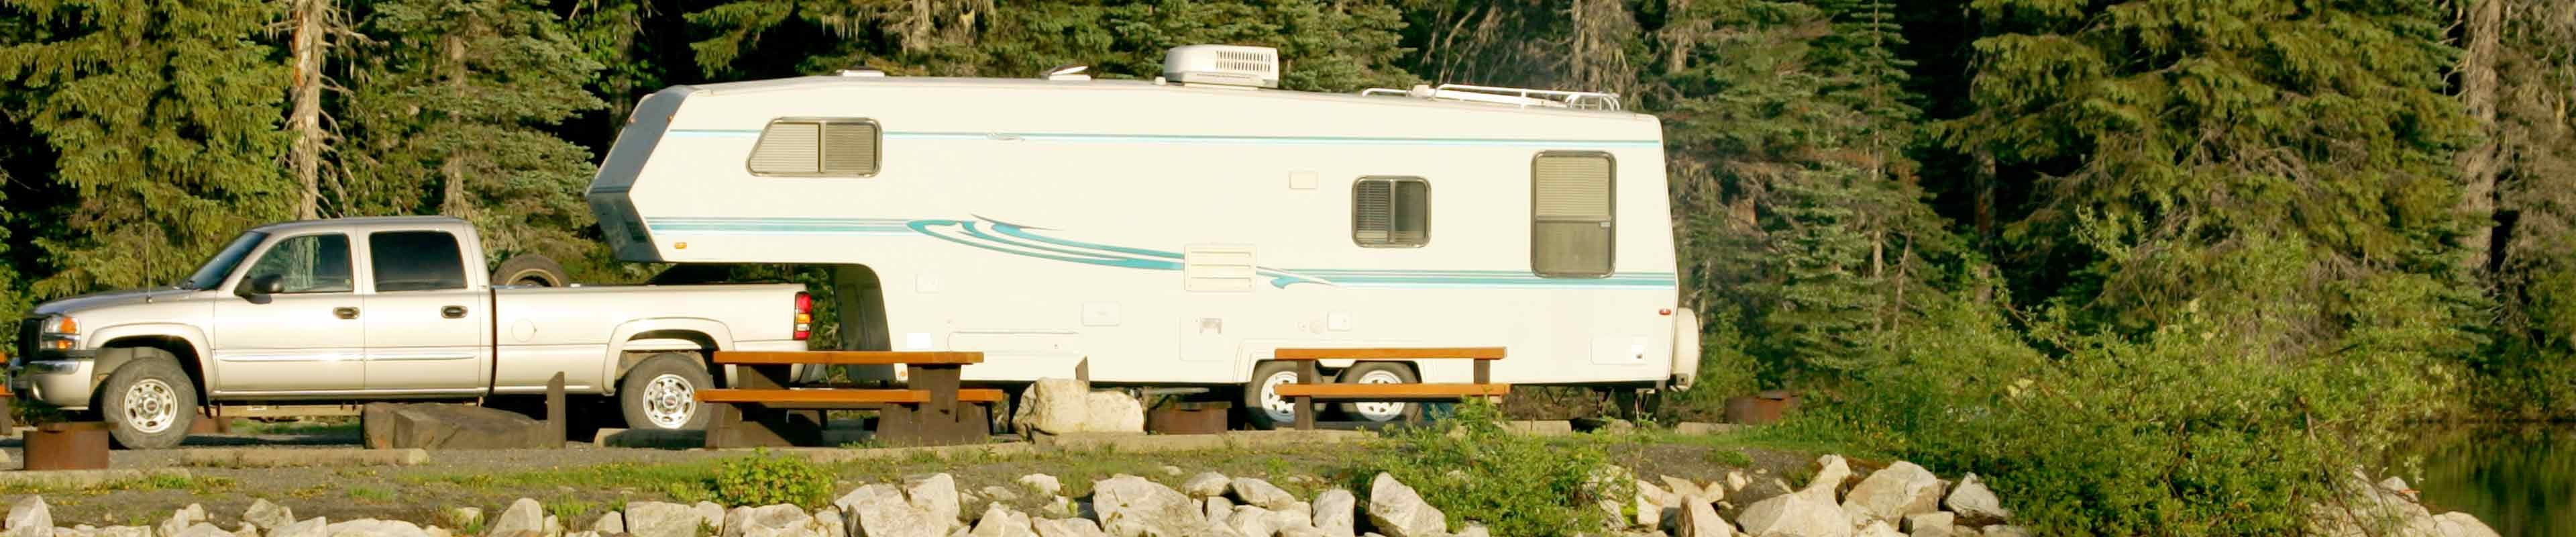 American Family Insurance | Image of a RV Camper parked on river.